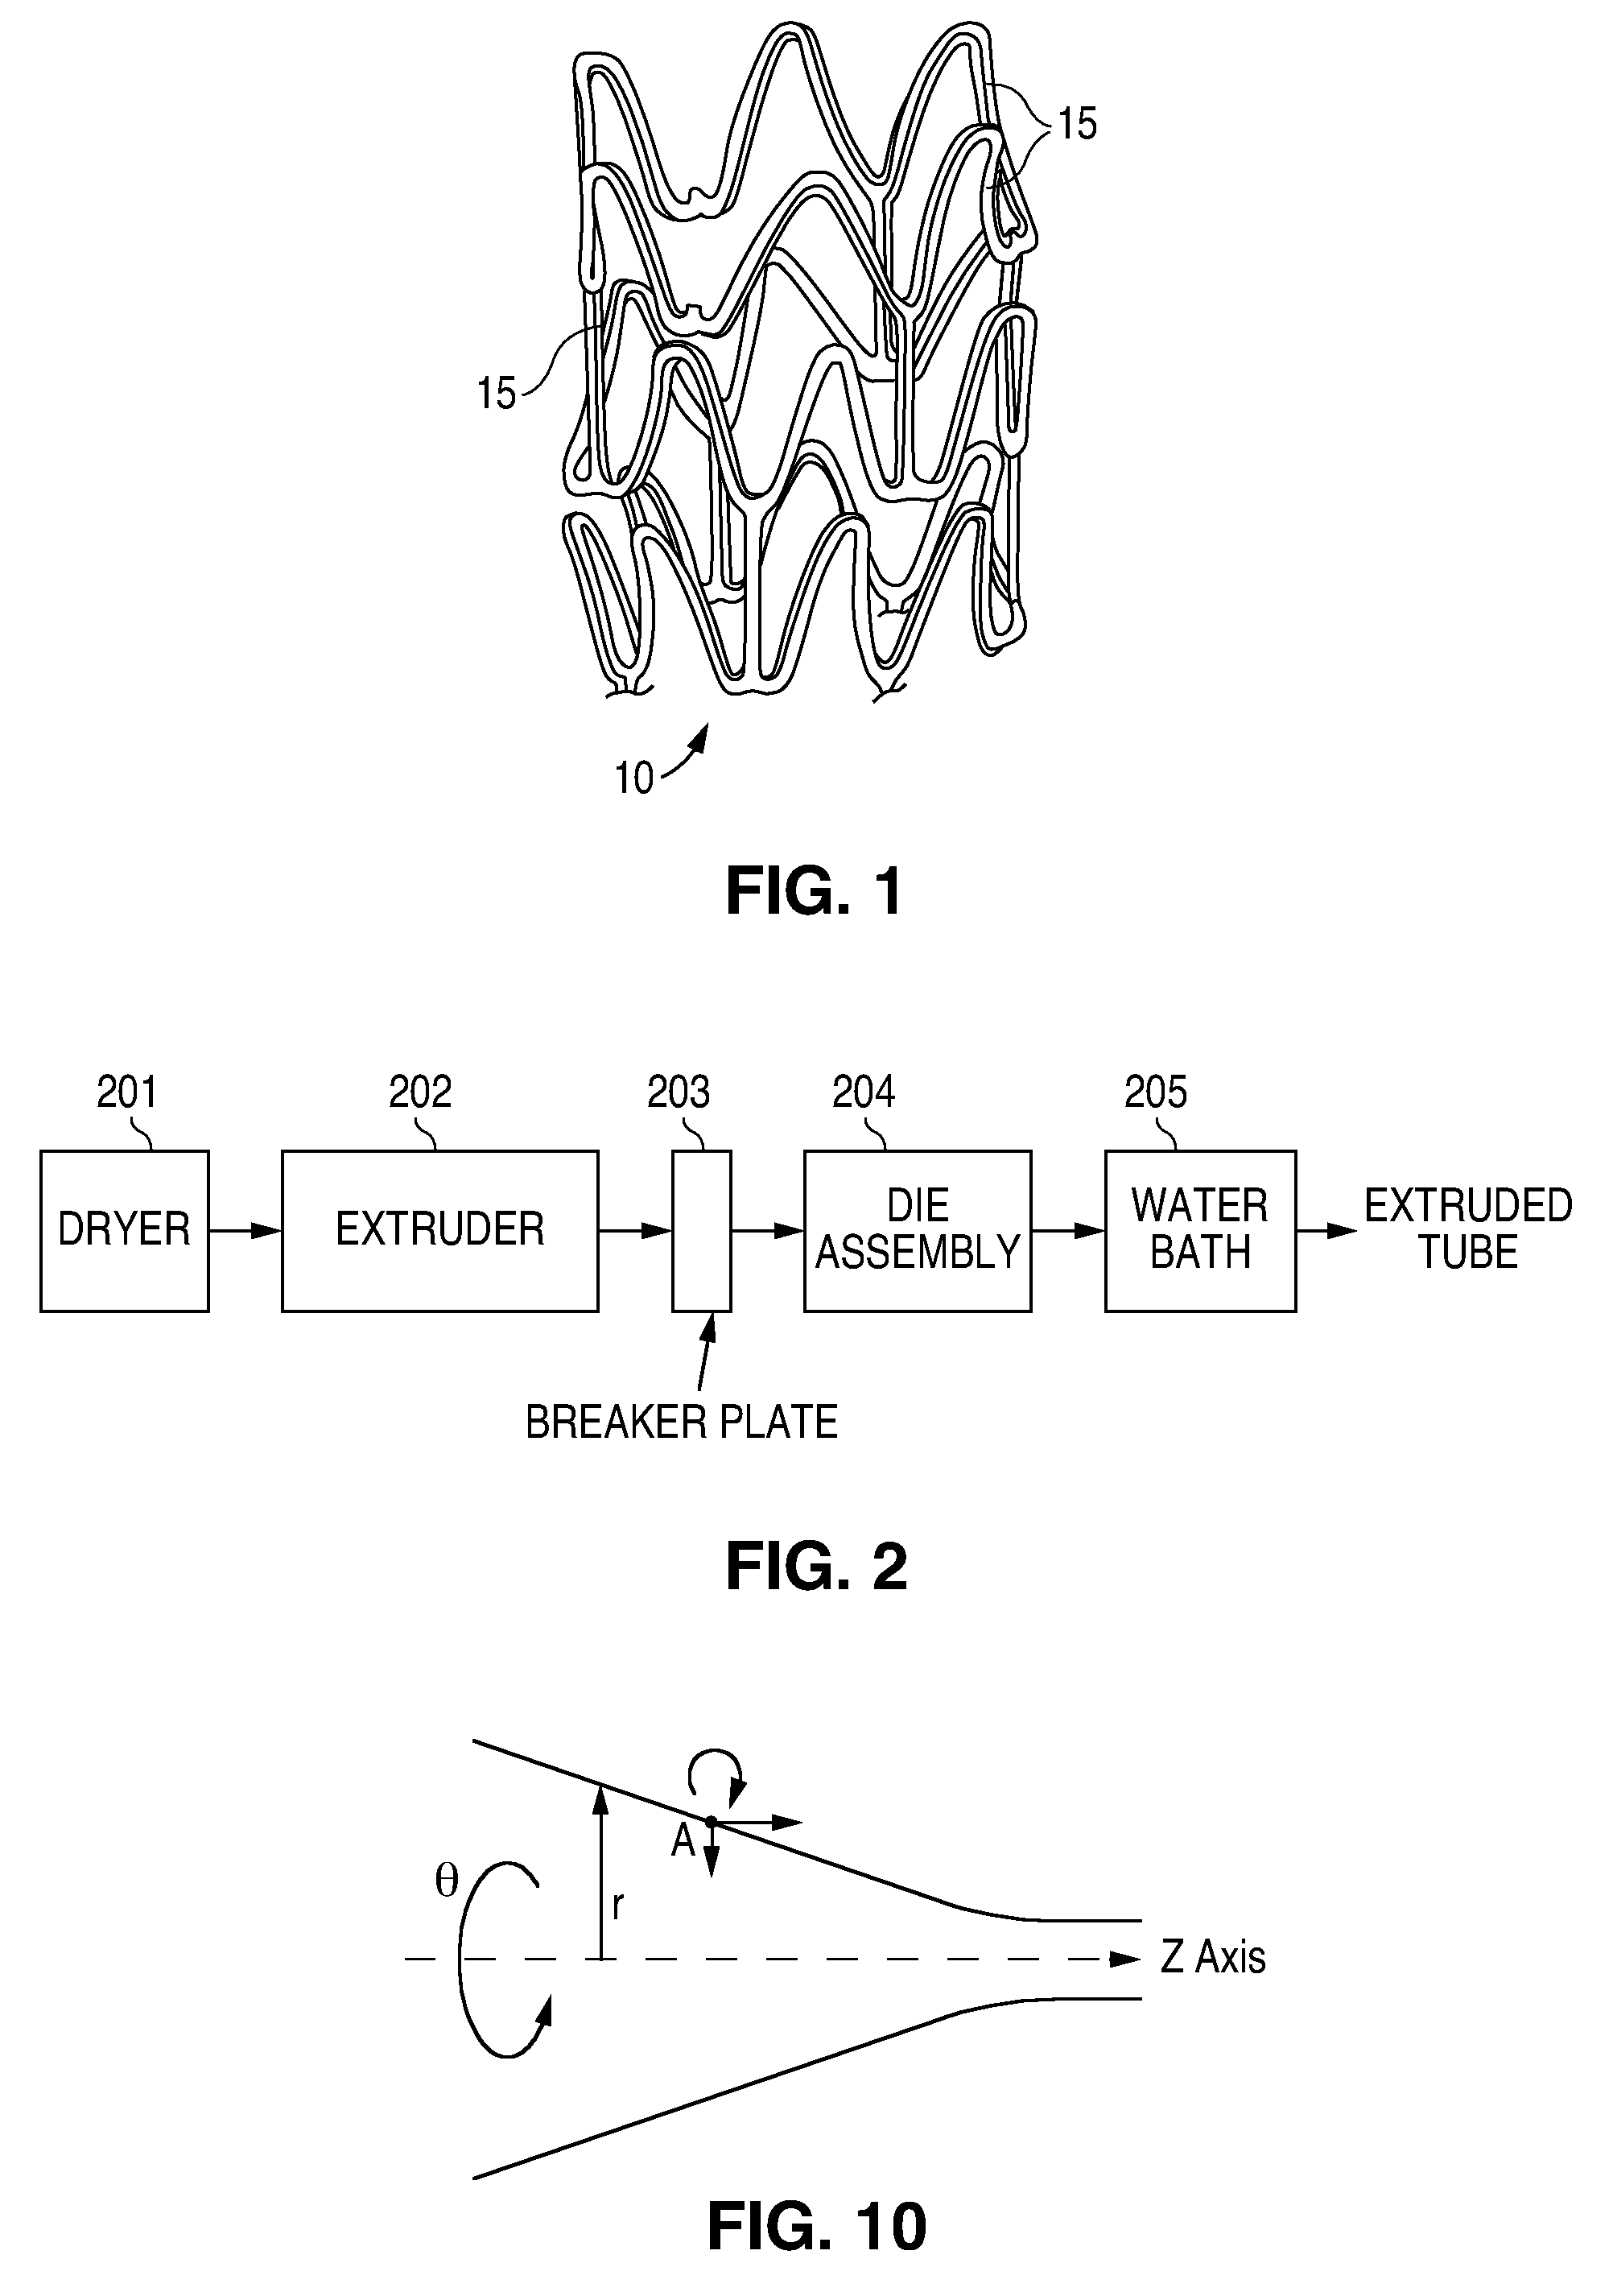 Method of fabricating a low crystallinity poly(L-lactide) tube